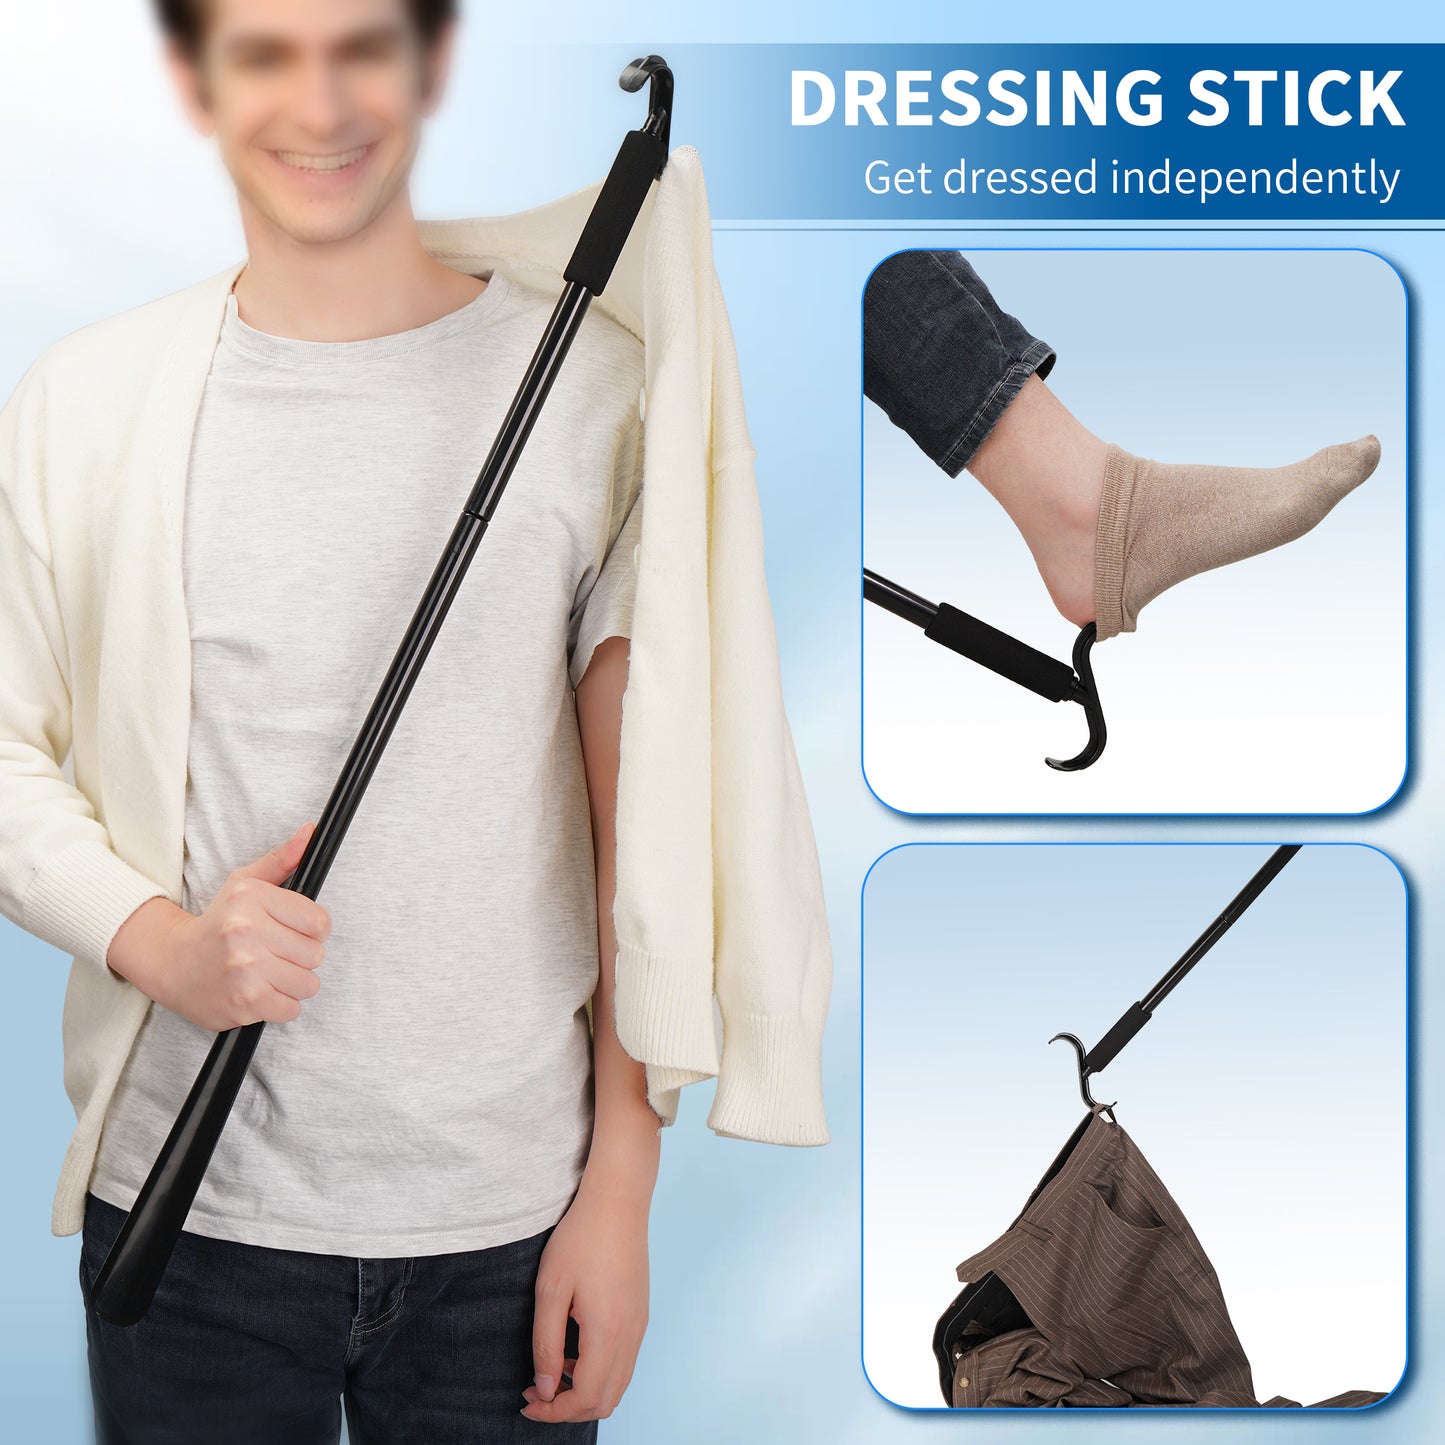 Dual Functional Ends Assistive Dressing Stick with Shoe Horn